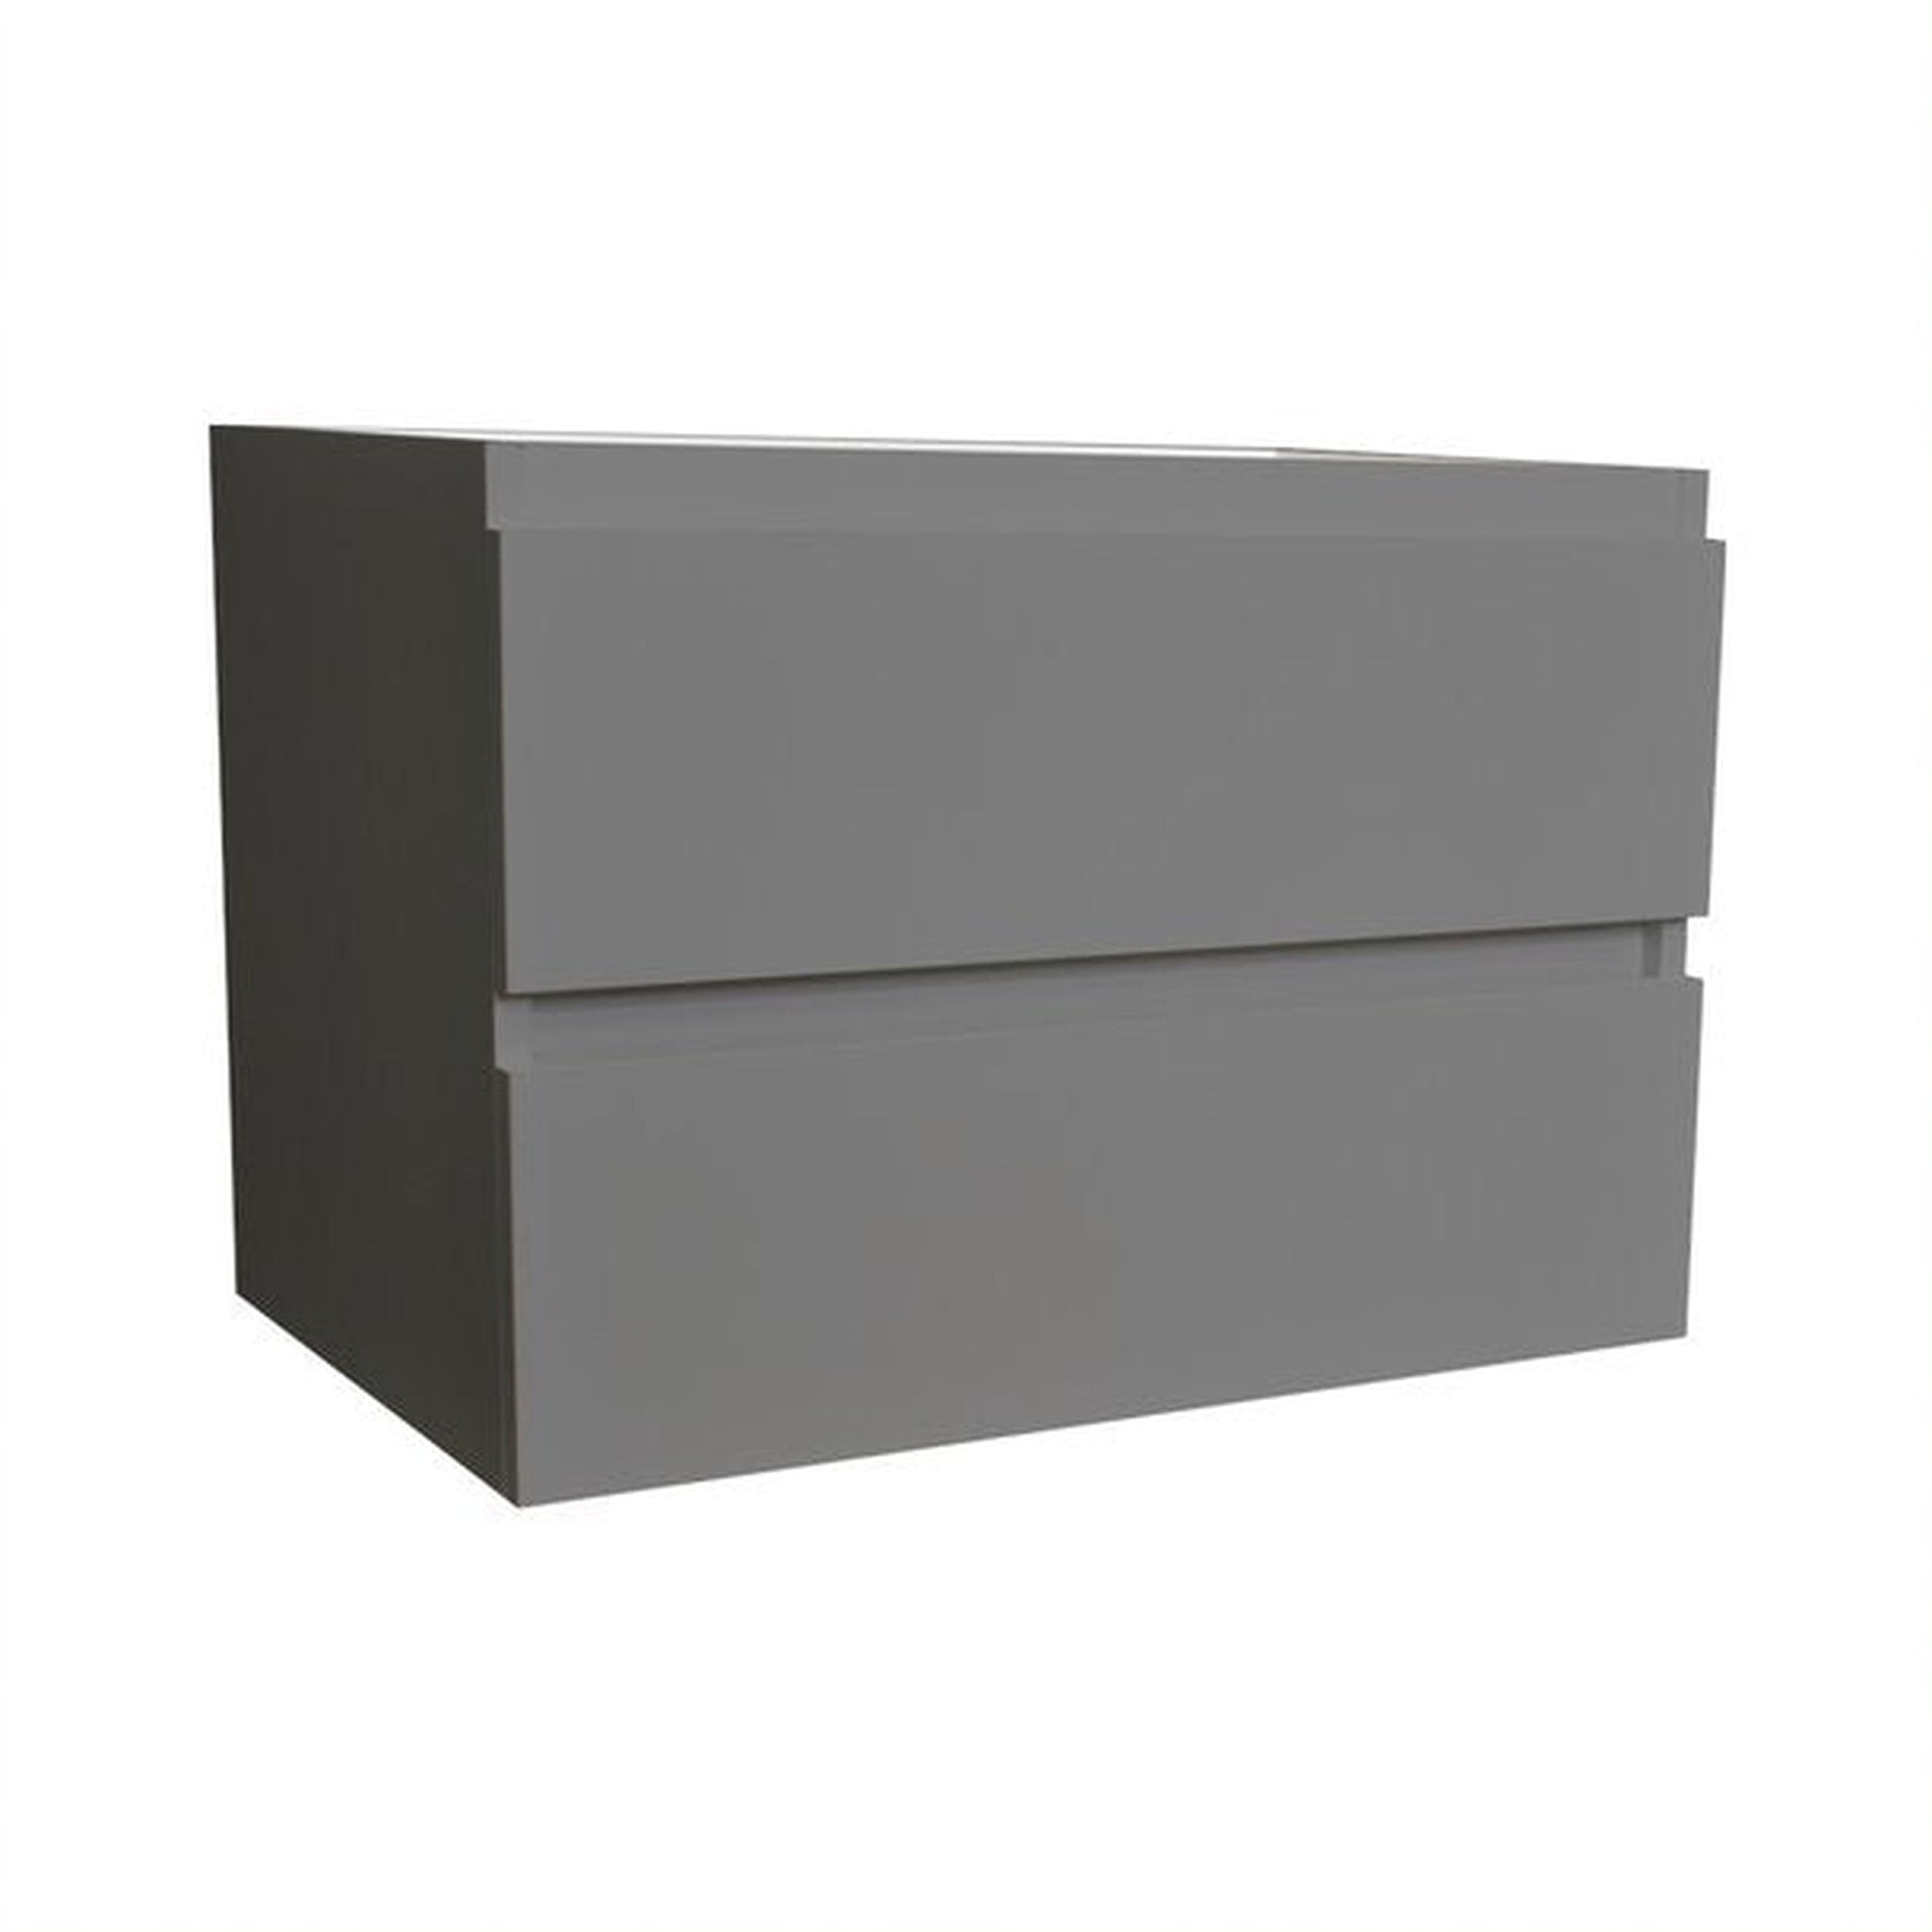 Volpa USA Salt 30" x 18" Gray Wall-Mounted Floating Bathroom Vanity Cabinet with Drawers